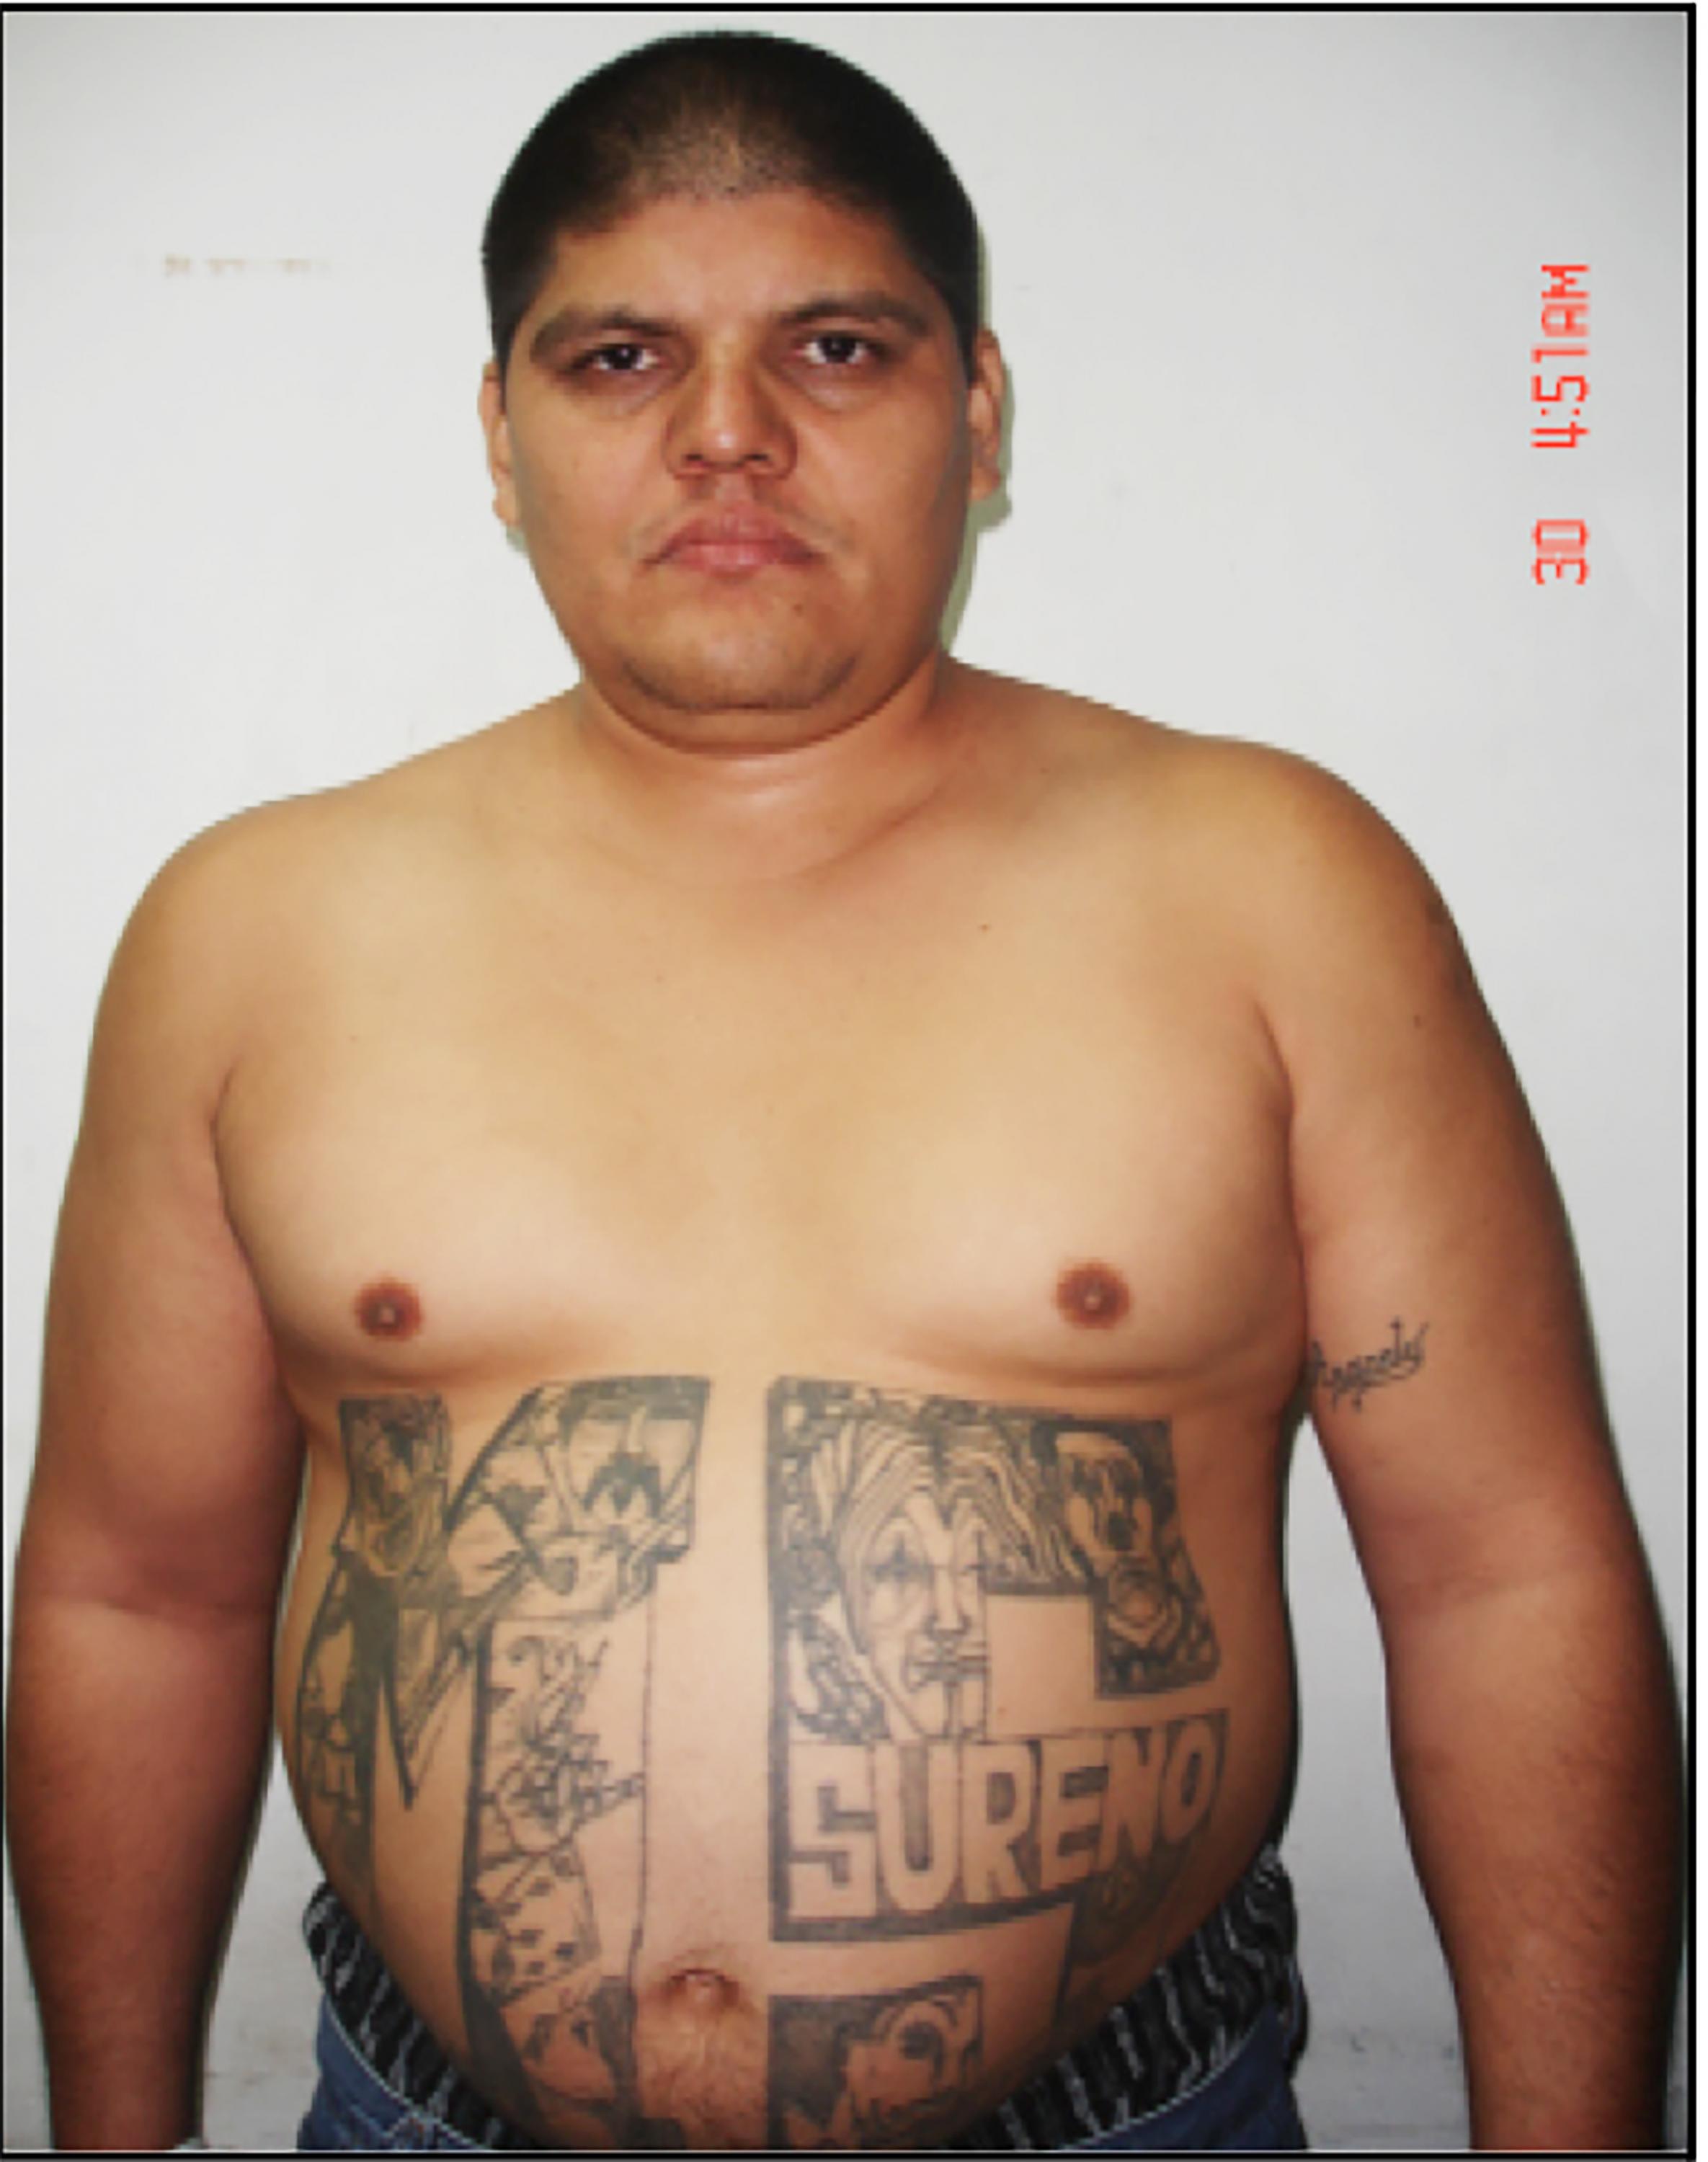 A photograph of Greñas after one of his arrests in El Salvador. His tattoo of the word sureño, “southern”, refers to the southern gangs of California, which were under the Mexican Mafia’s control. The tattoos recount Greñas’ time in the US until he was first deported in 1999, before MS-13 had created its national leadership and before the gang was at the center of El Salvador’s public security debate.